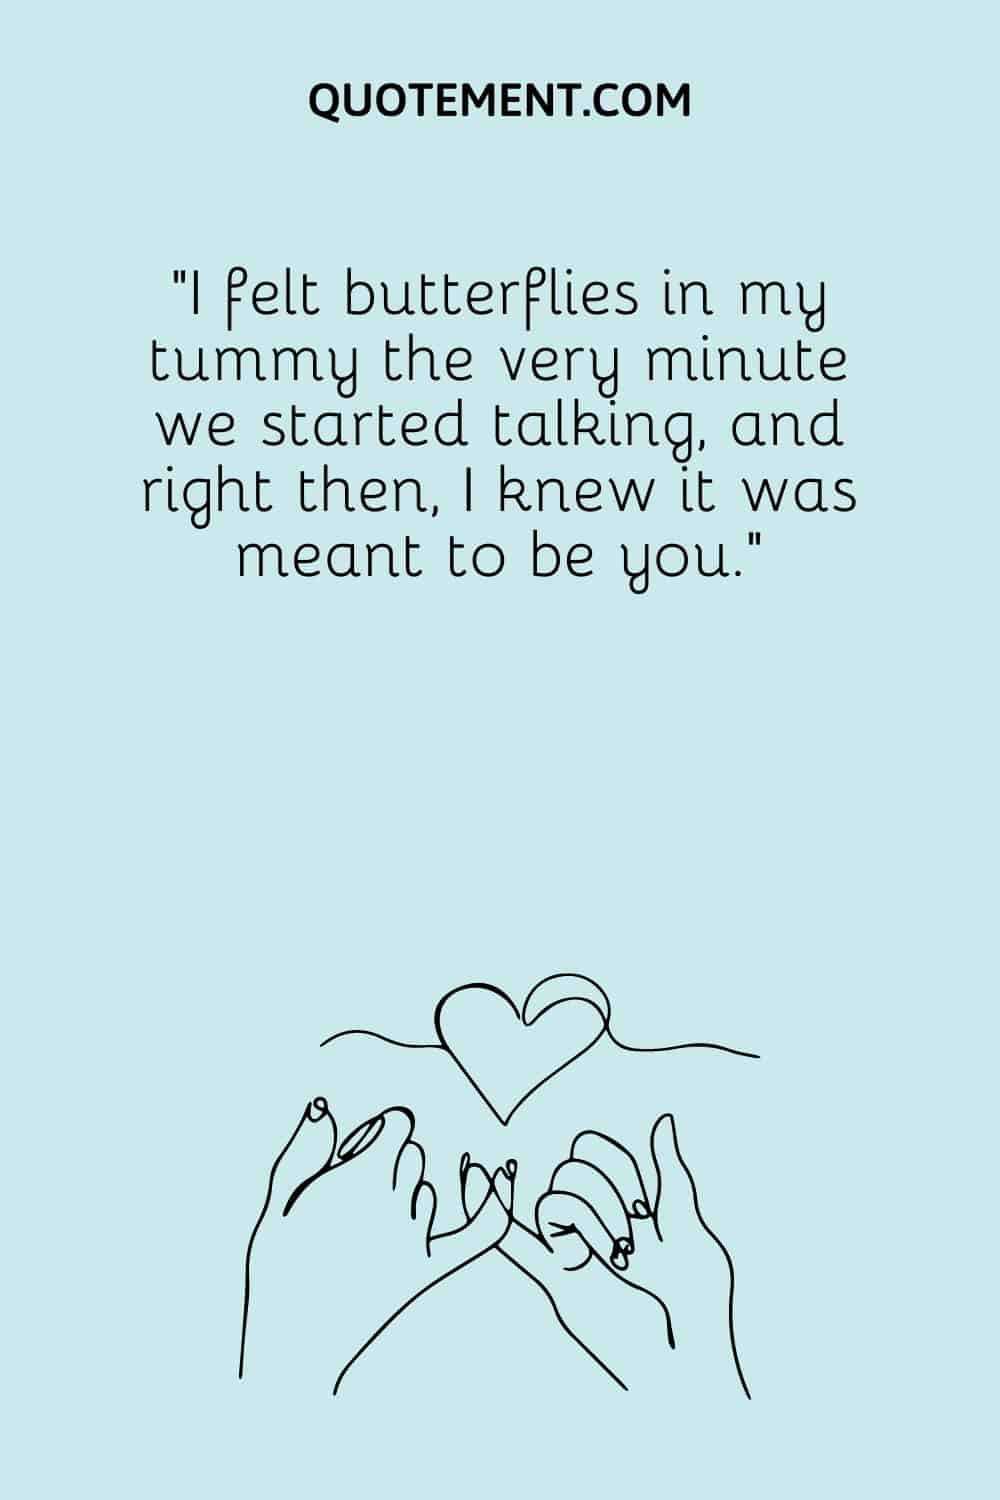 I felt butterflies in my tummy the very minute we started talking